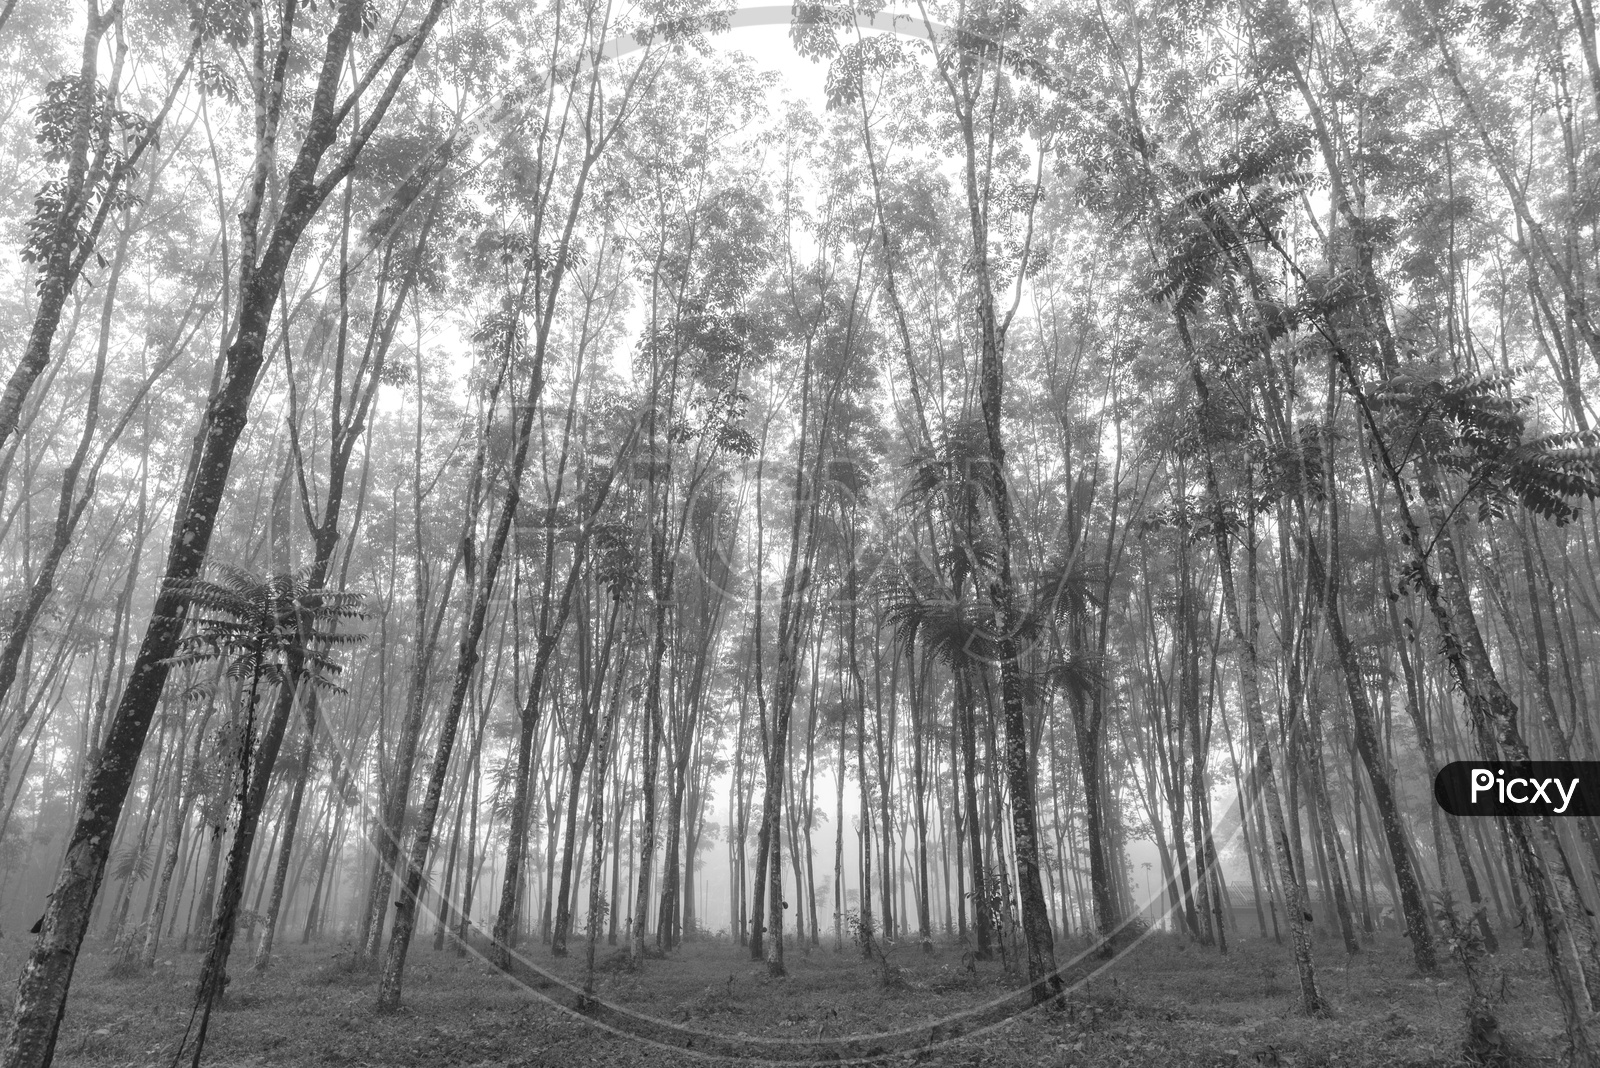 Scenic forest of fresh green deciduous trees framed by leaves, with the sun casting its warm rays through the foliage With B&W Filter